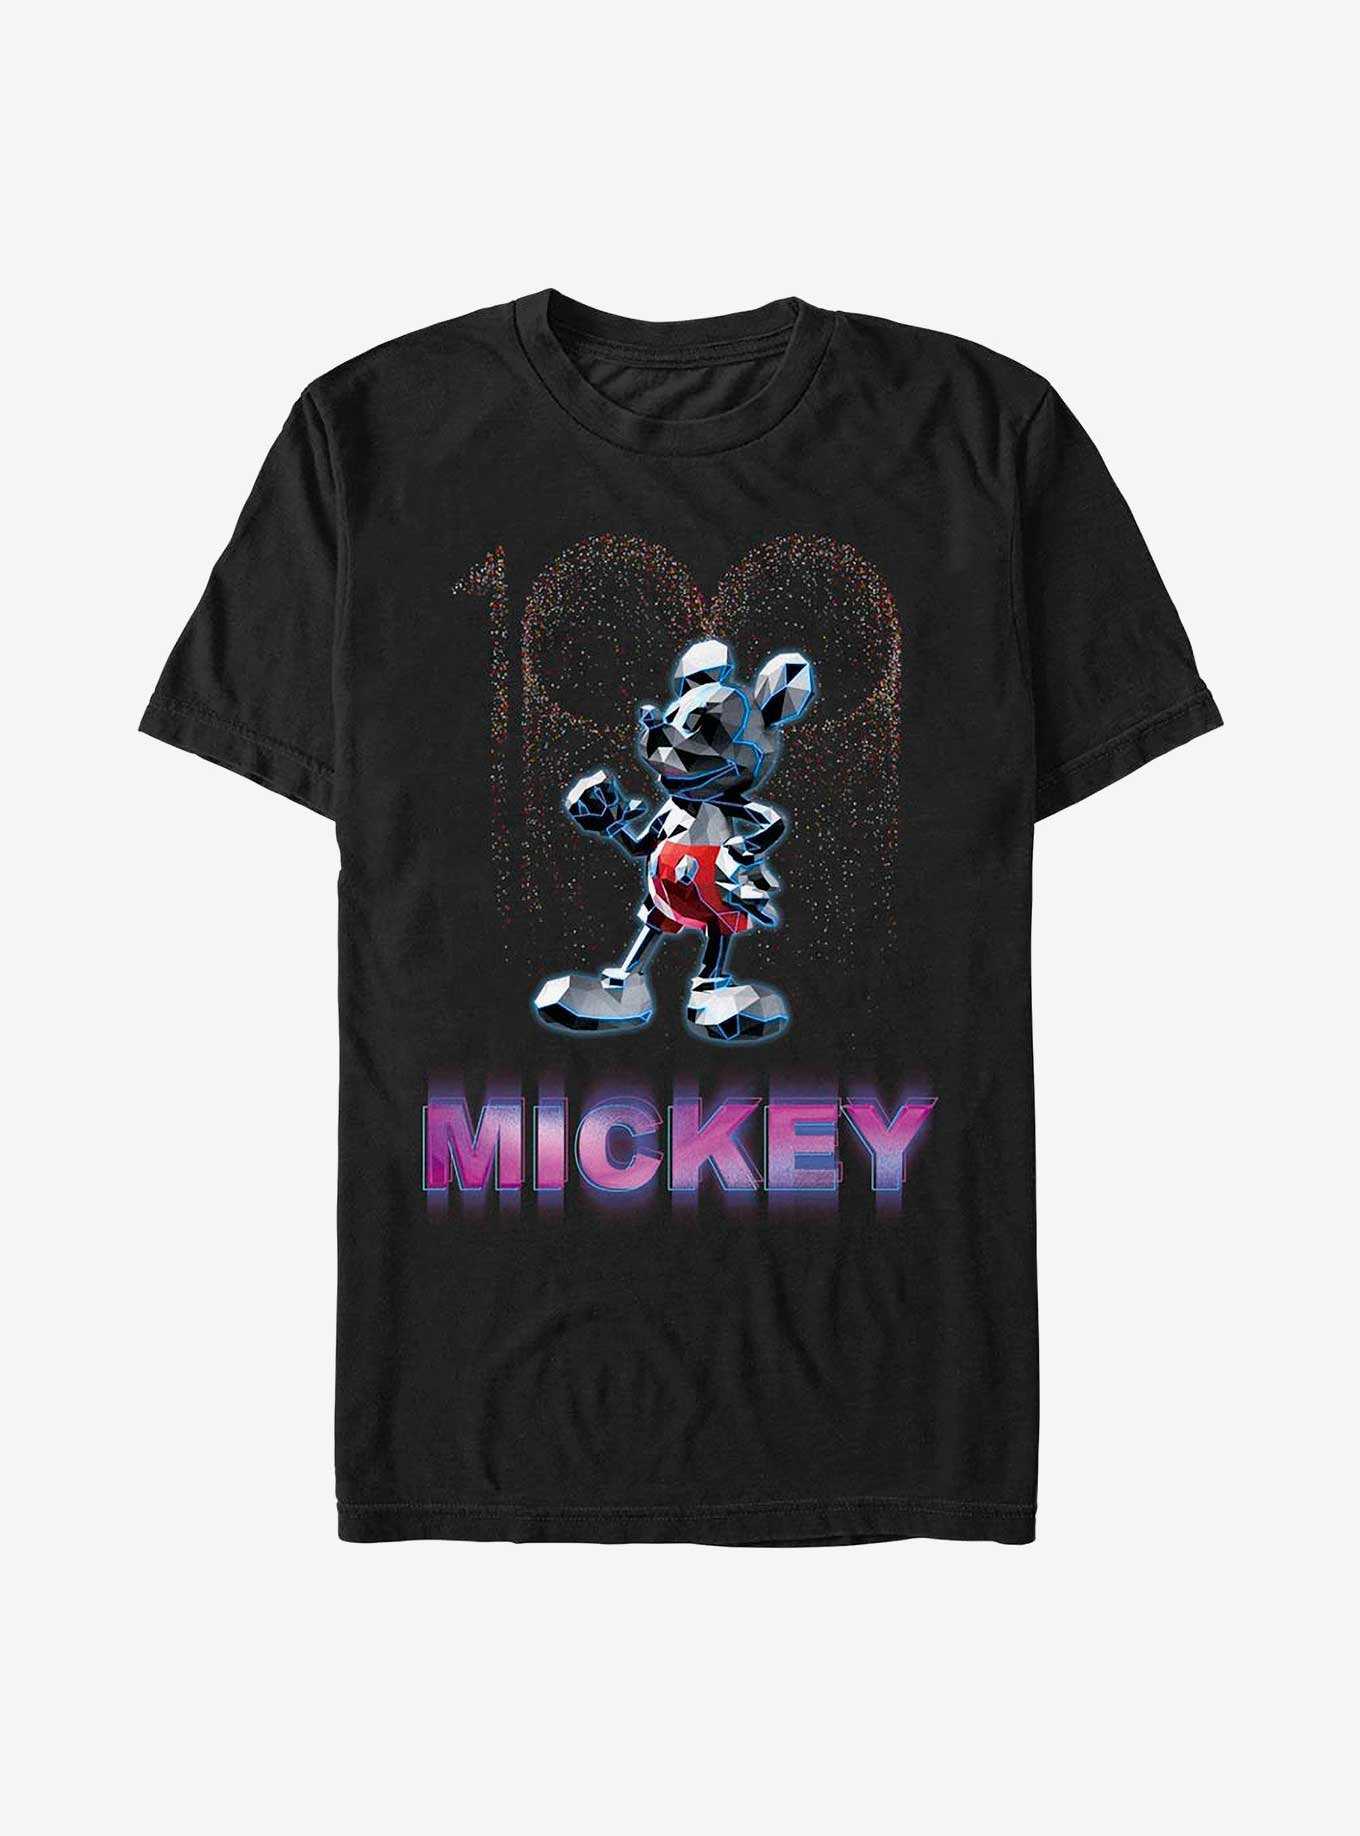 Disney100 Crystal Figurine Mickey Mouse T-Shirt, , hi-res